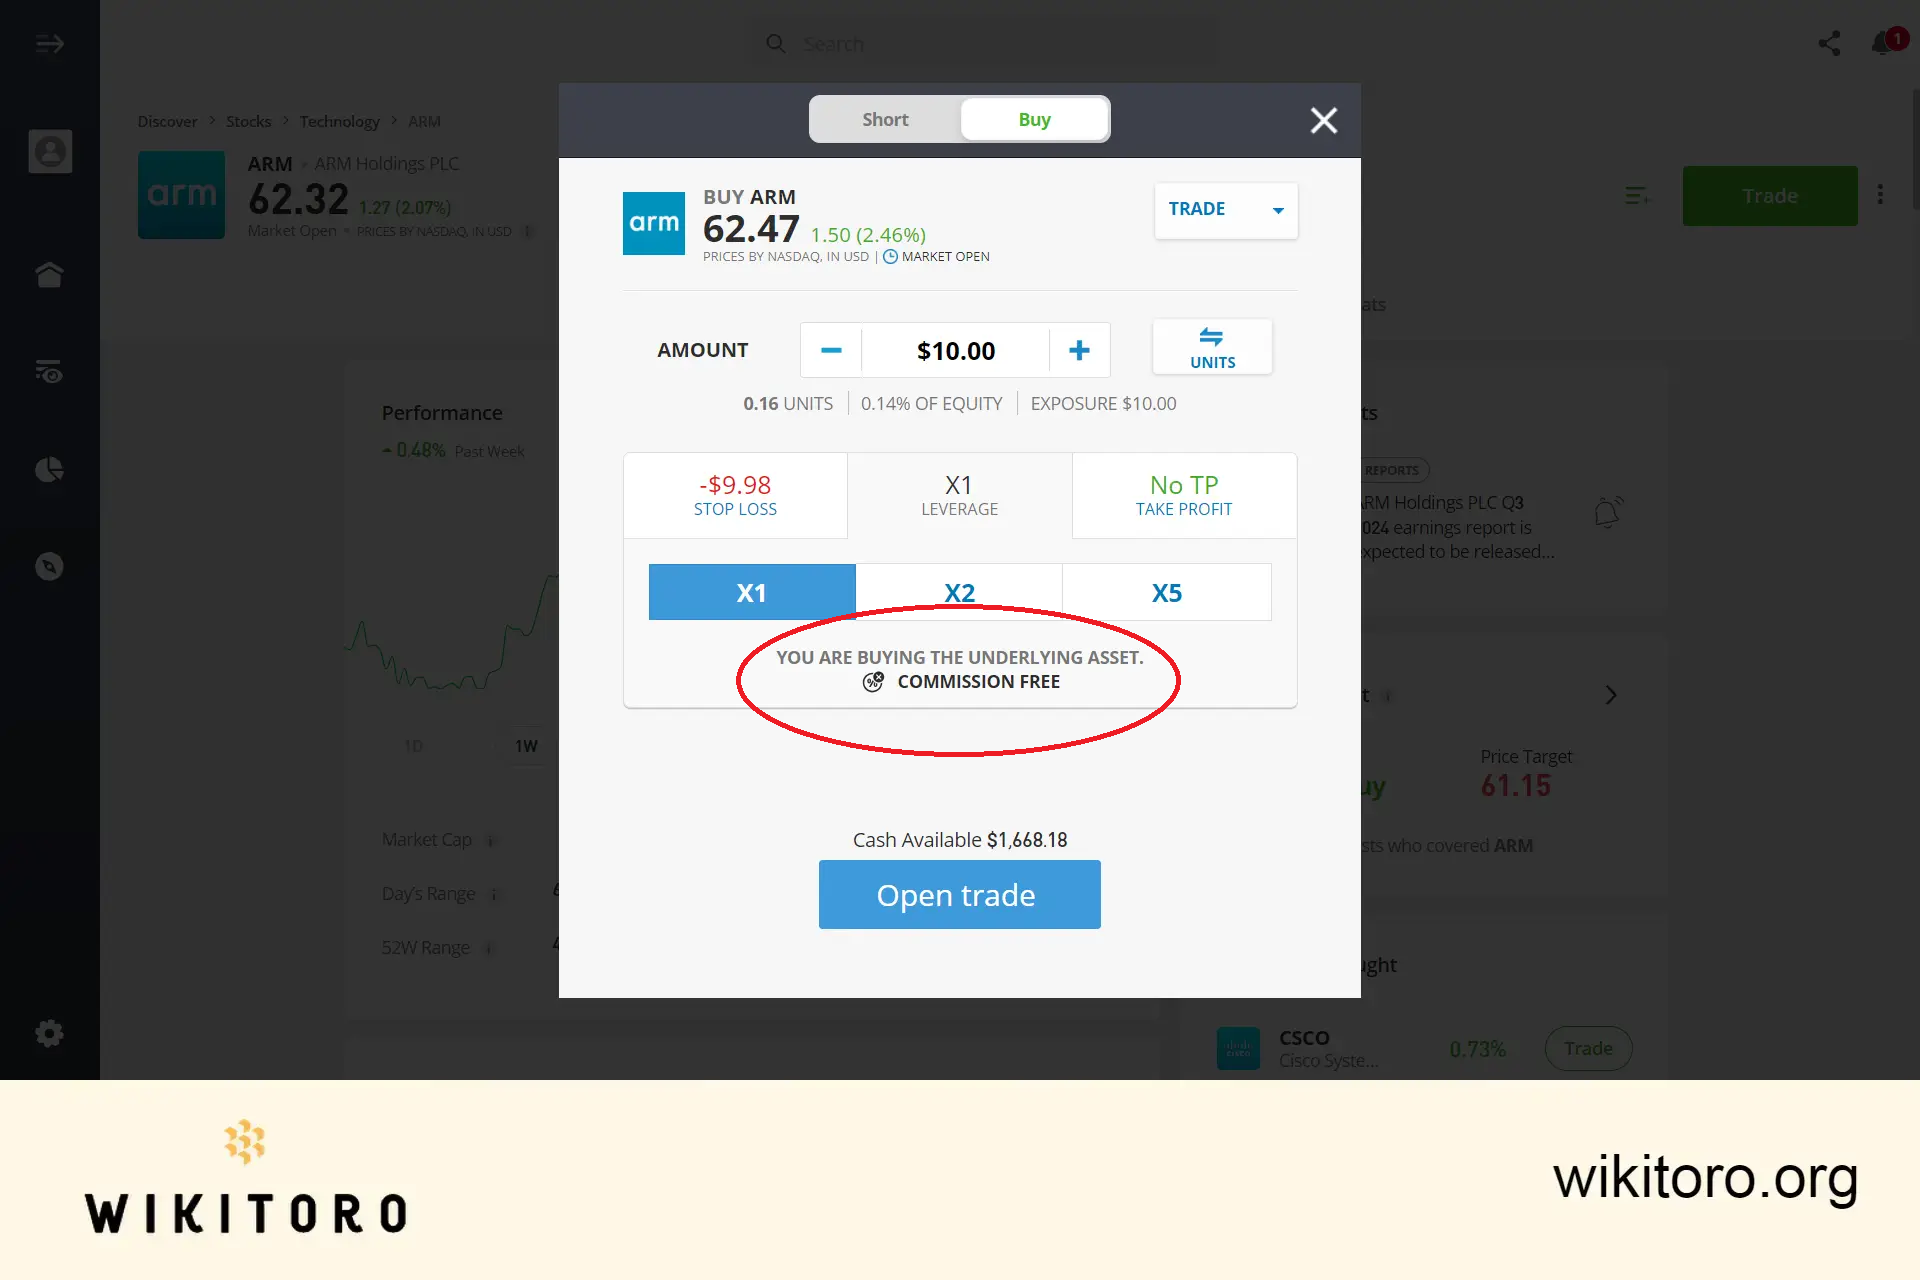 Real ARM stock trading on eToro is commission-free